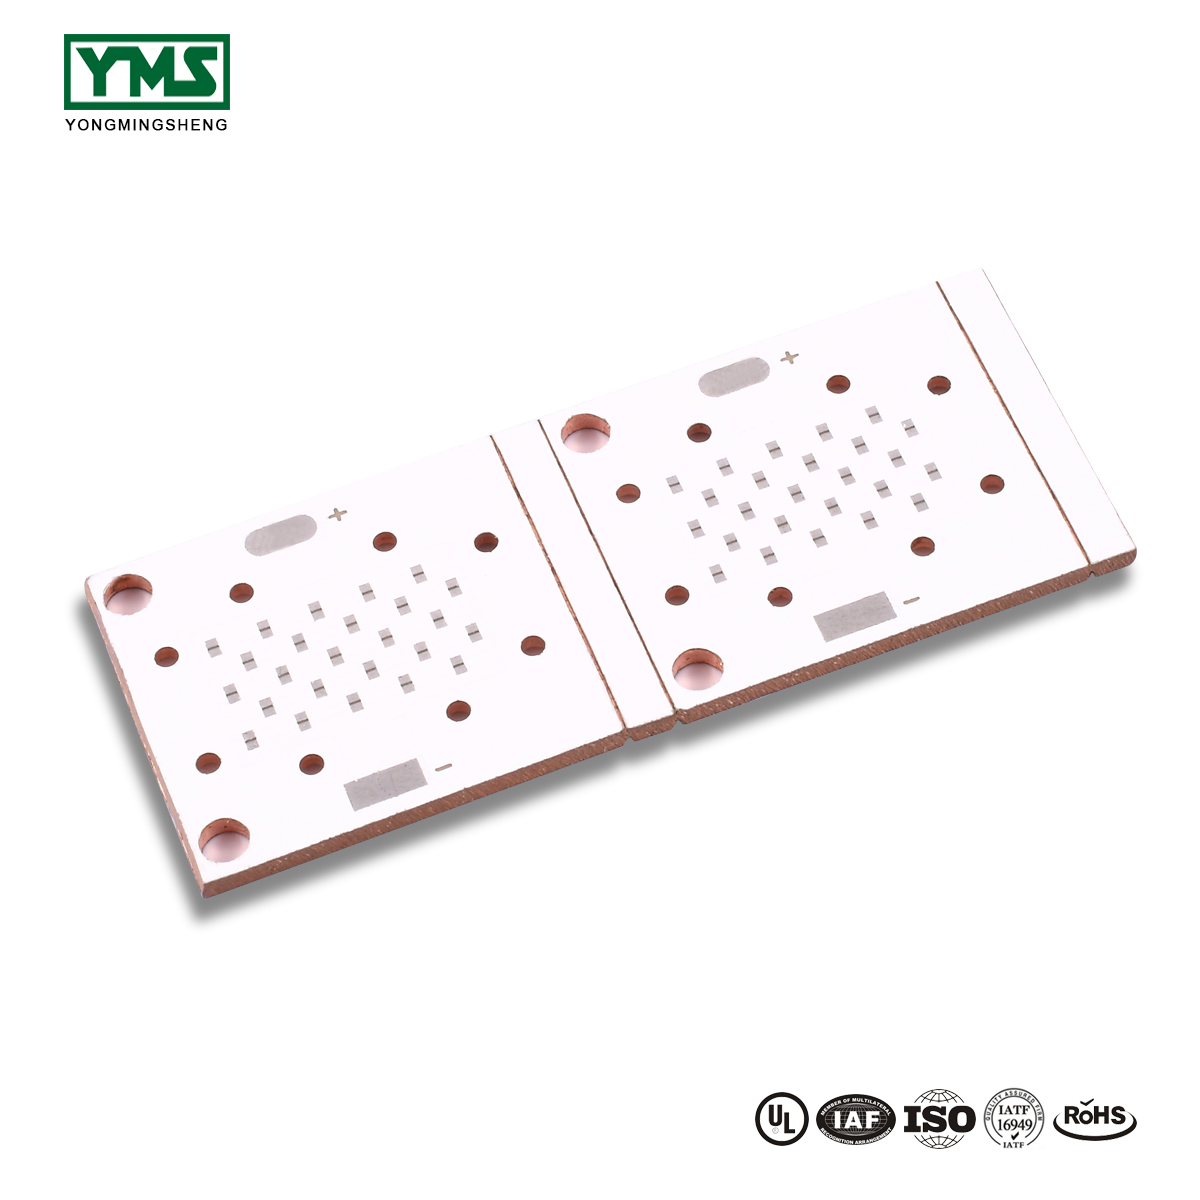 OEM manufacturer Hard Gold Pcb - 1 Layer Thermoelectric Copper base Board | YMSPCB – Yongmingsheng